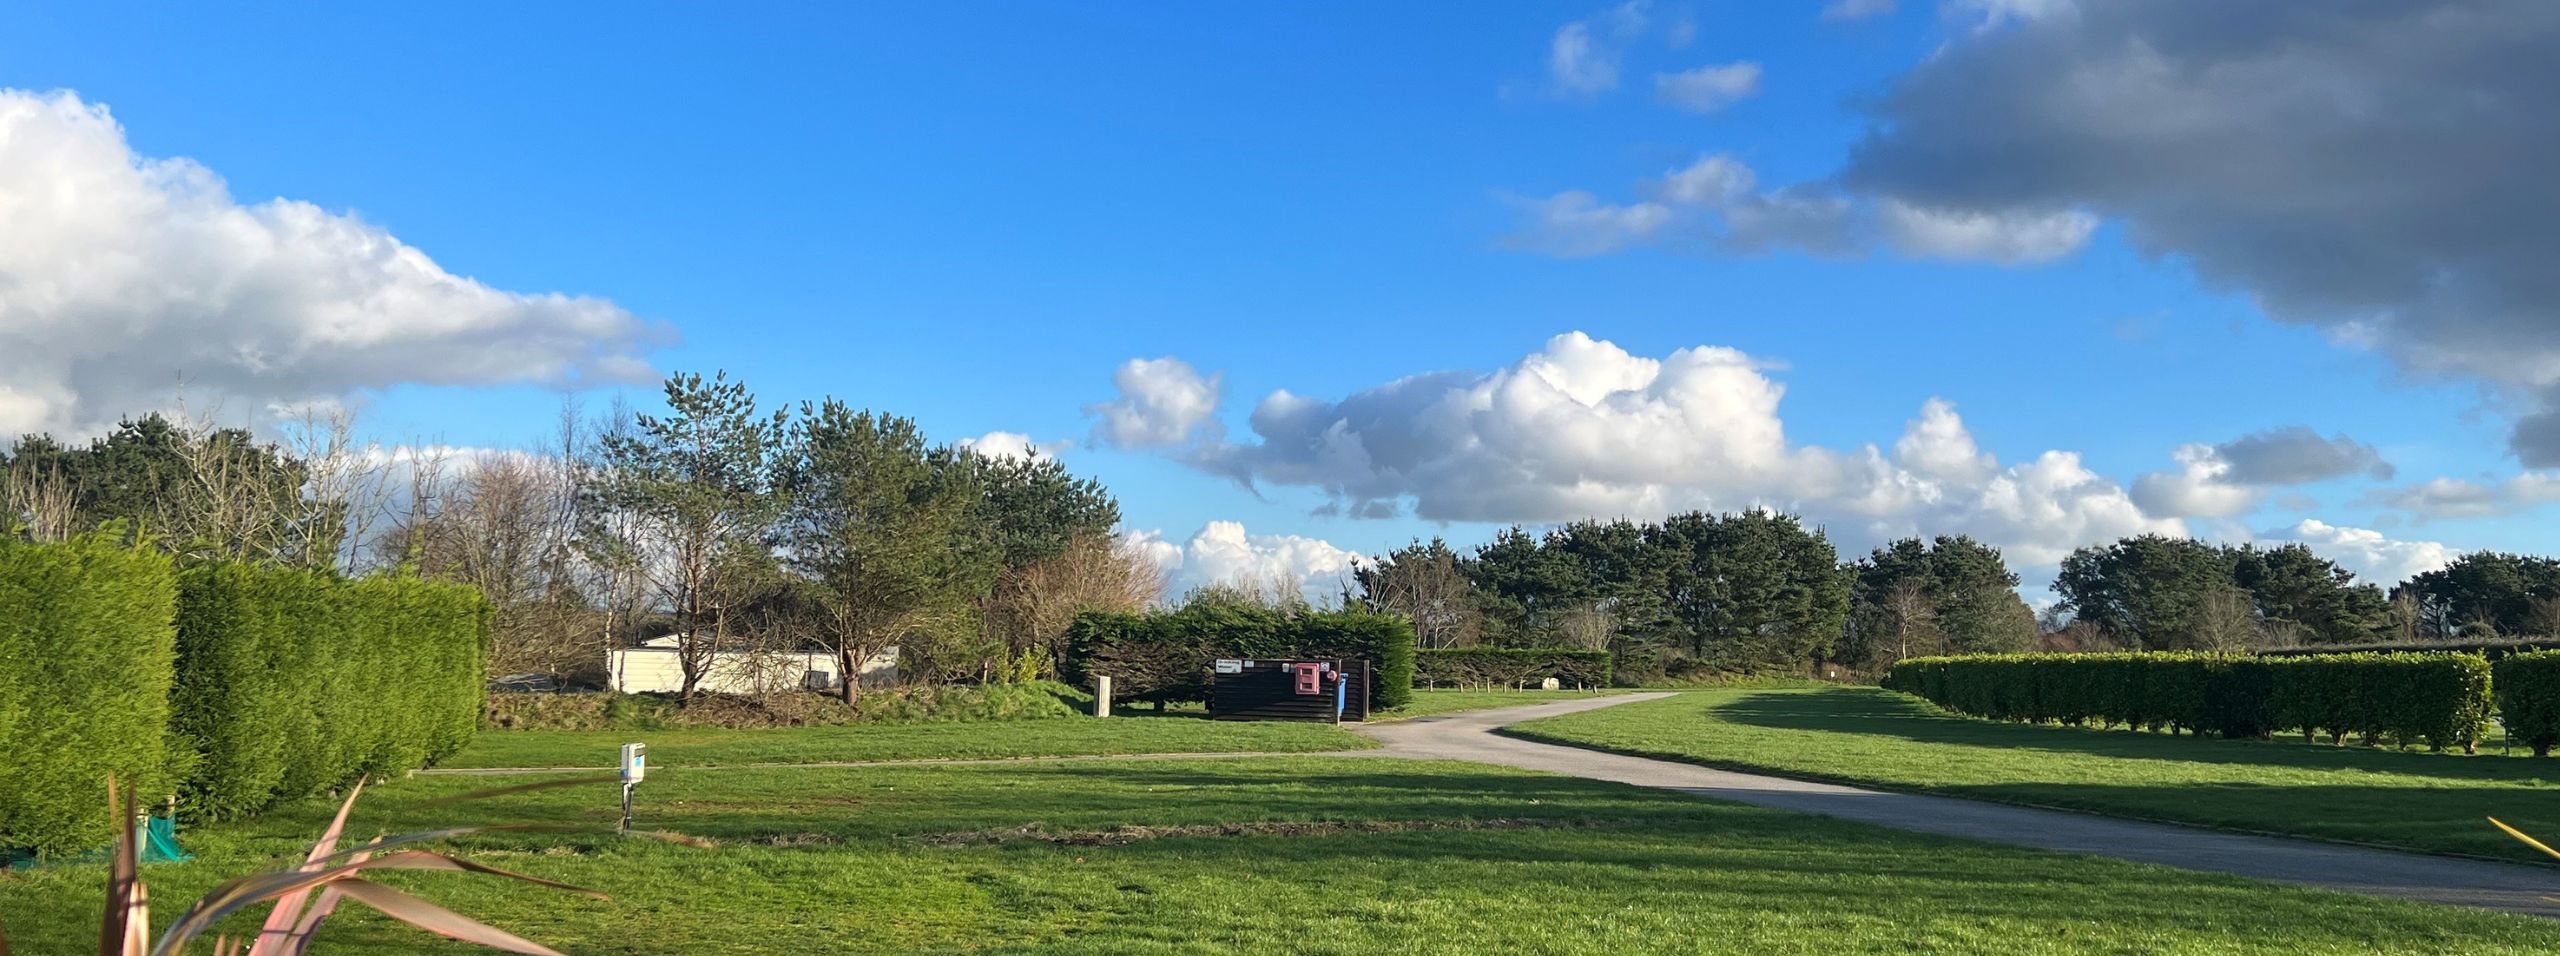 A panoramic view of a lush green park with neatly trimmed hedges, a winding pathway, and fluffy clouds in a blue sky. A small red structure is visible in the distance at the Cornwall campsite